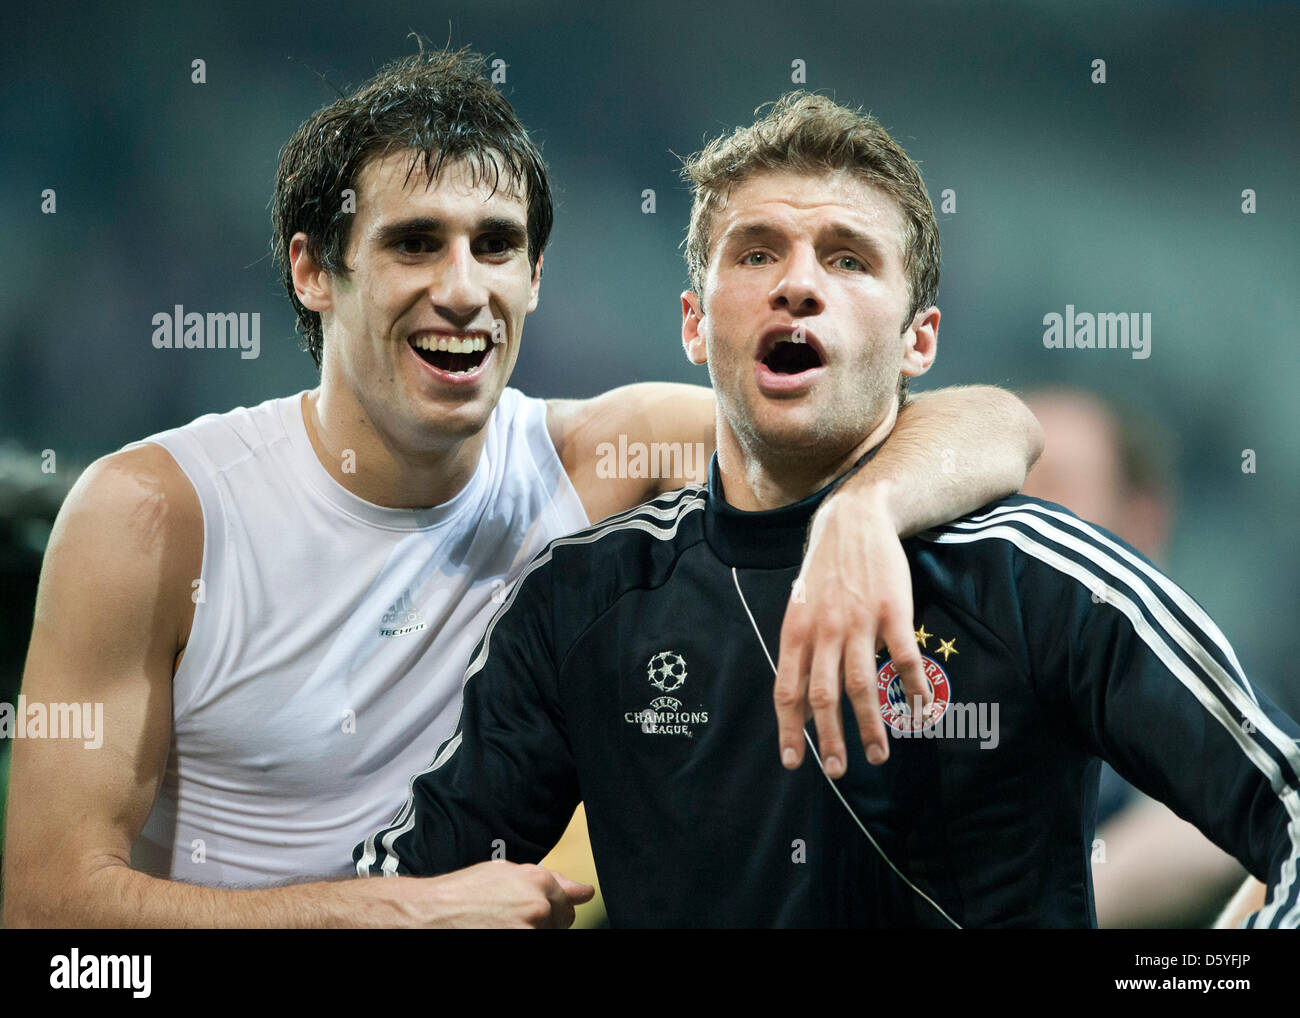 Munich's Javi Martinez (L) and Munich's Thomas Mueller (R) celebrate after the the Champions League Group F soccer match between OSC Lille and FC Bayern Munich at the Grand Stade Lille Metropole in Lille, France, 23 October 2012. Munich won 1-0.  Photo: Victoria Bonn-Meuser/dpa  +++(c) dpa - Bildfunk+++ Stock Photo